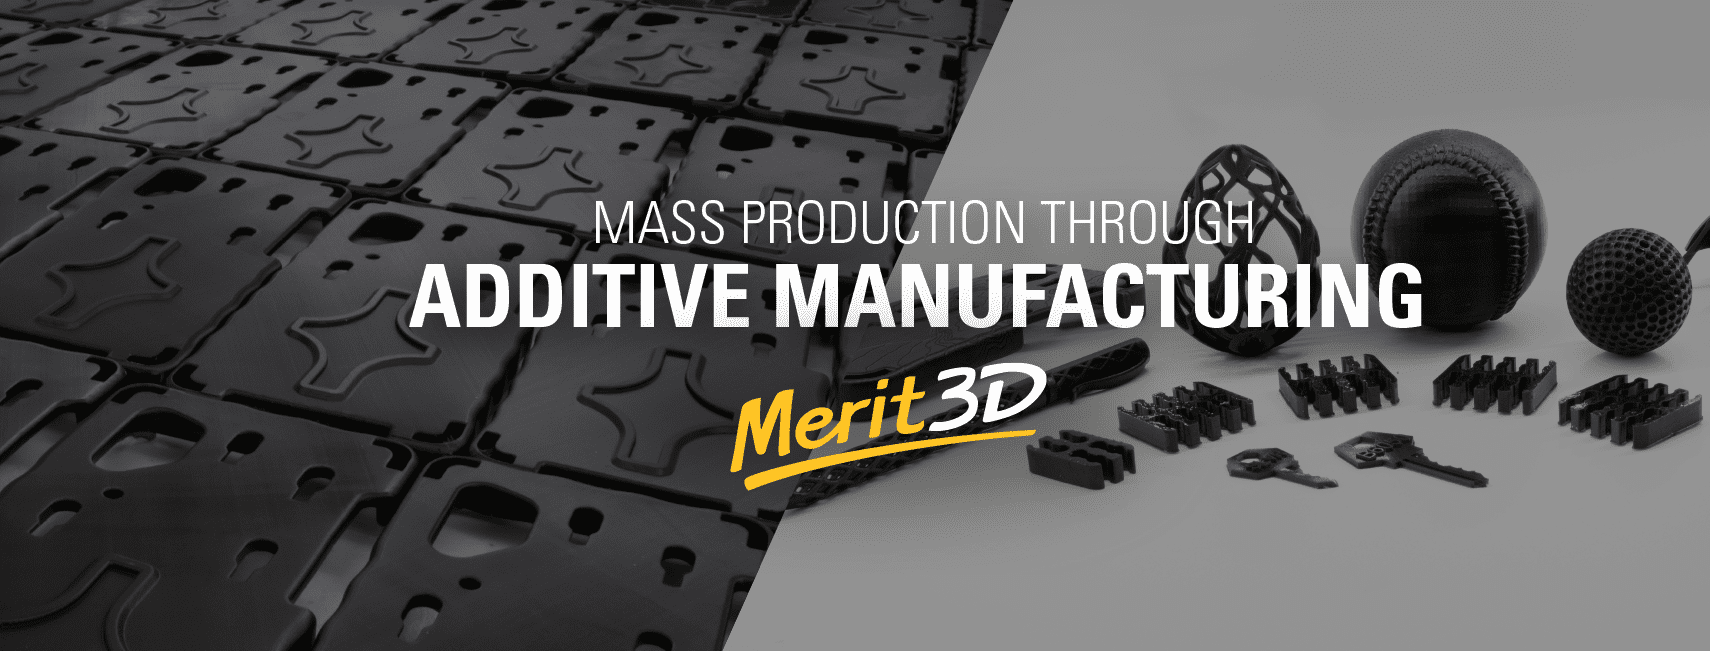 60,000 3D Printed component in 1 Day Helps Bring Manufacturing Back to USA